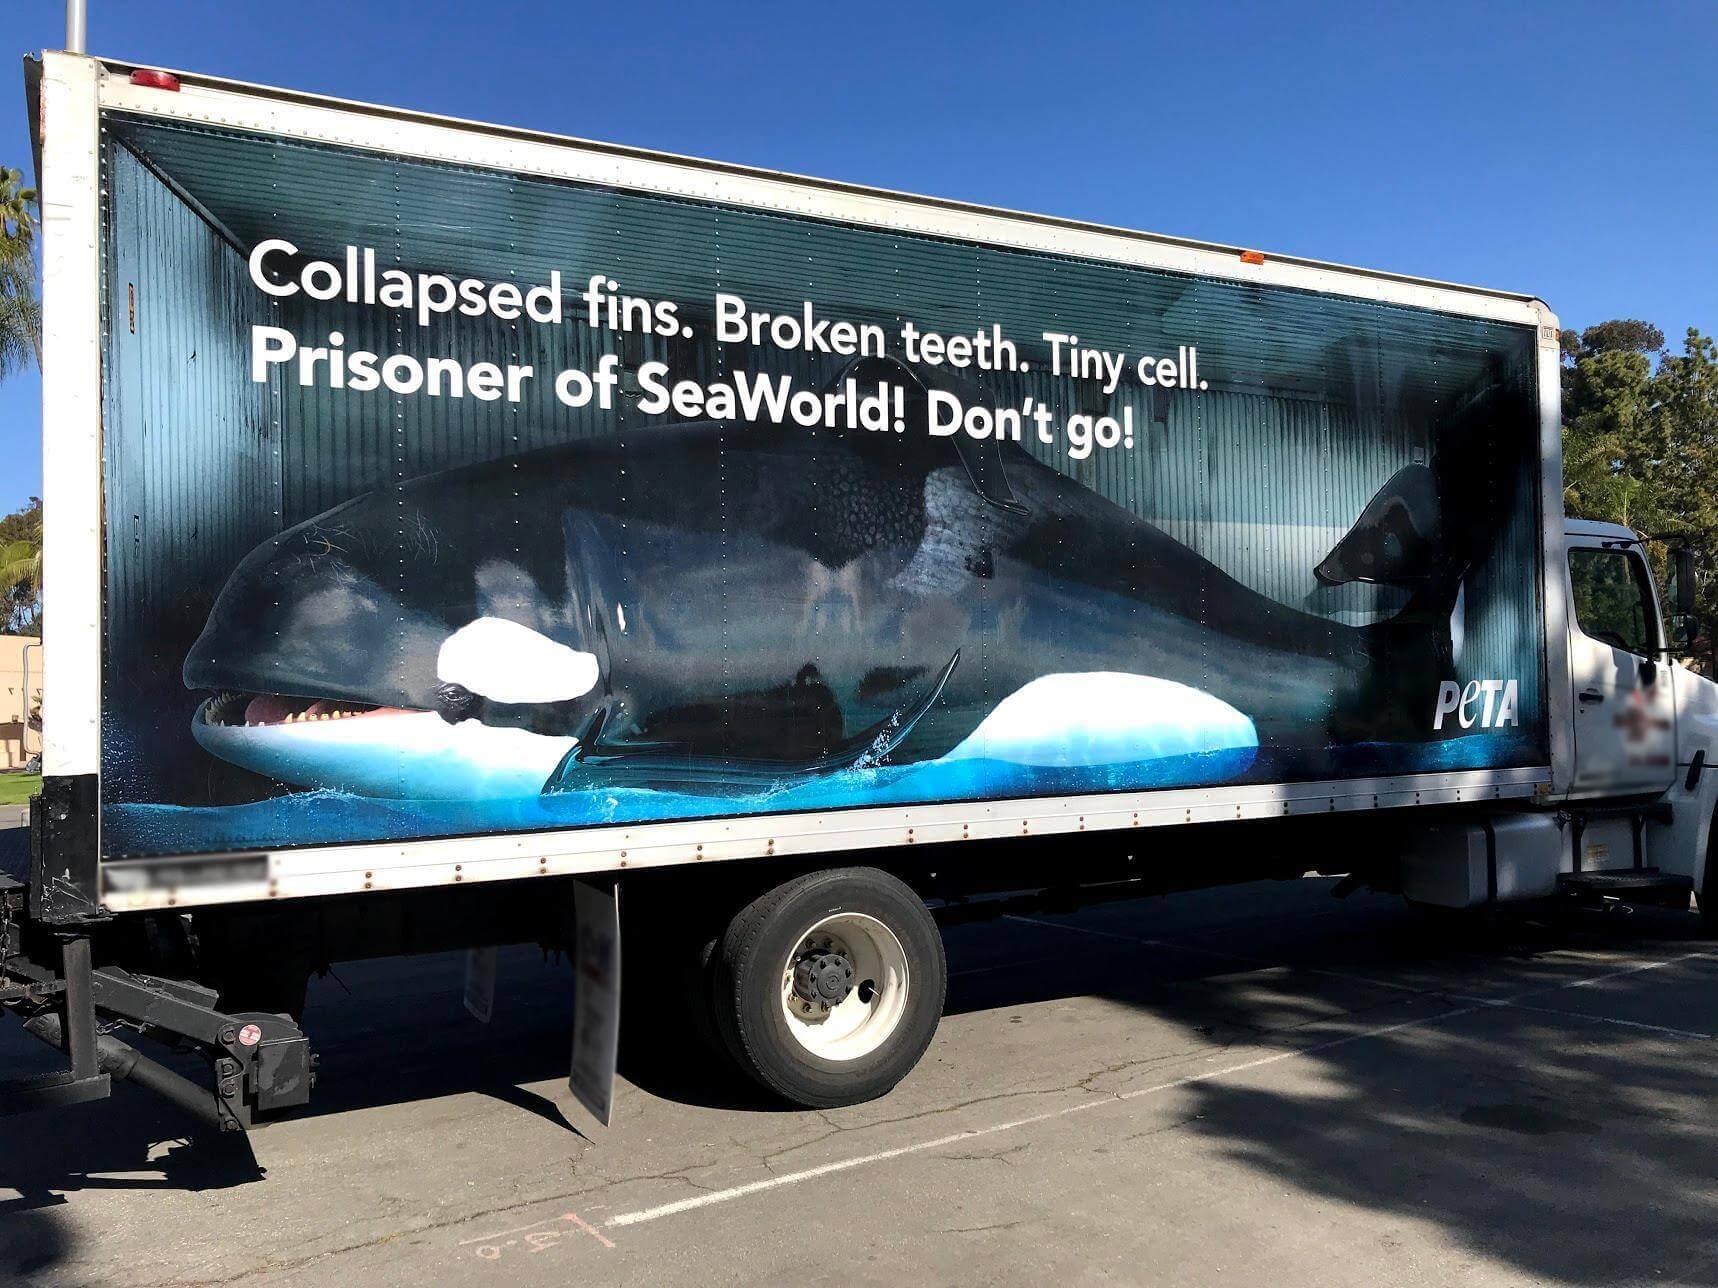 An image of a truck-side ad for PETA. The ad says, "Collapsed fins. Broekn teeth. Tiny cell. Prisoner of SeaWorld! Don't go!" with an image of a whale. 